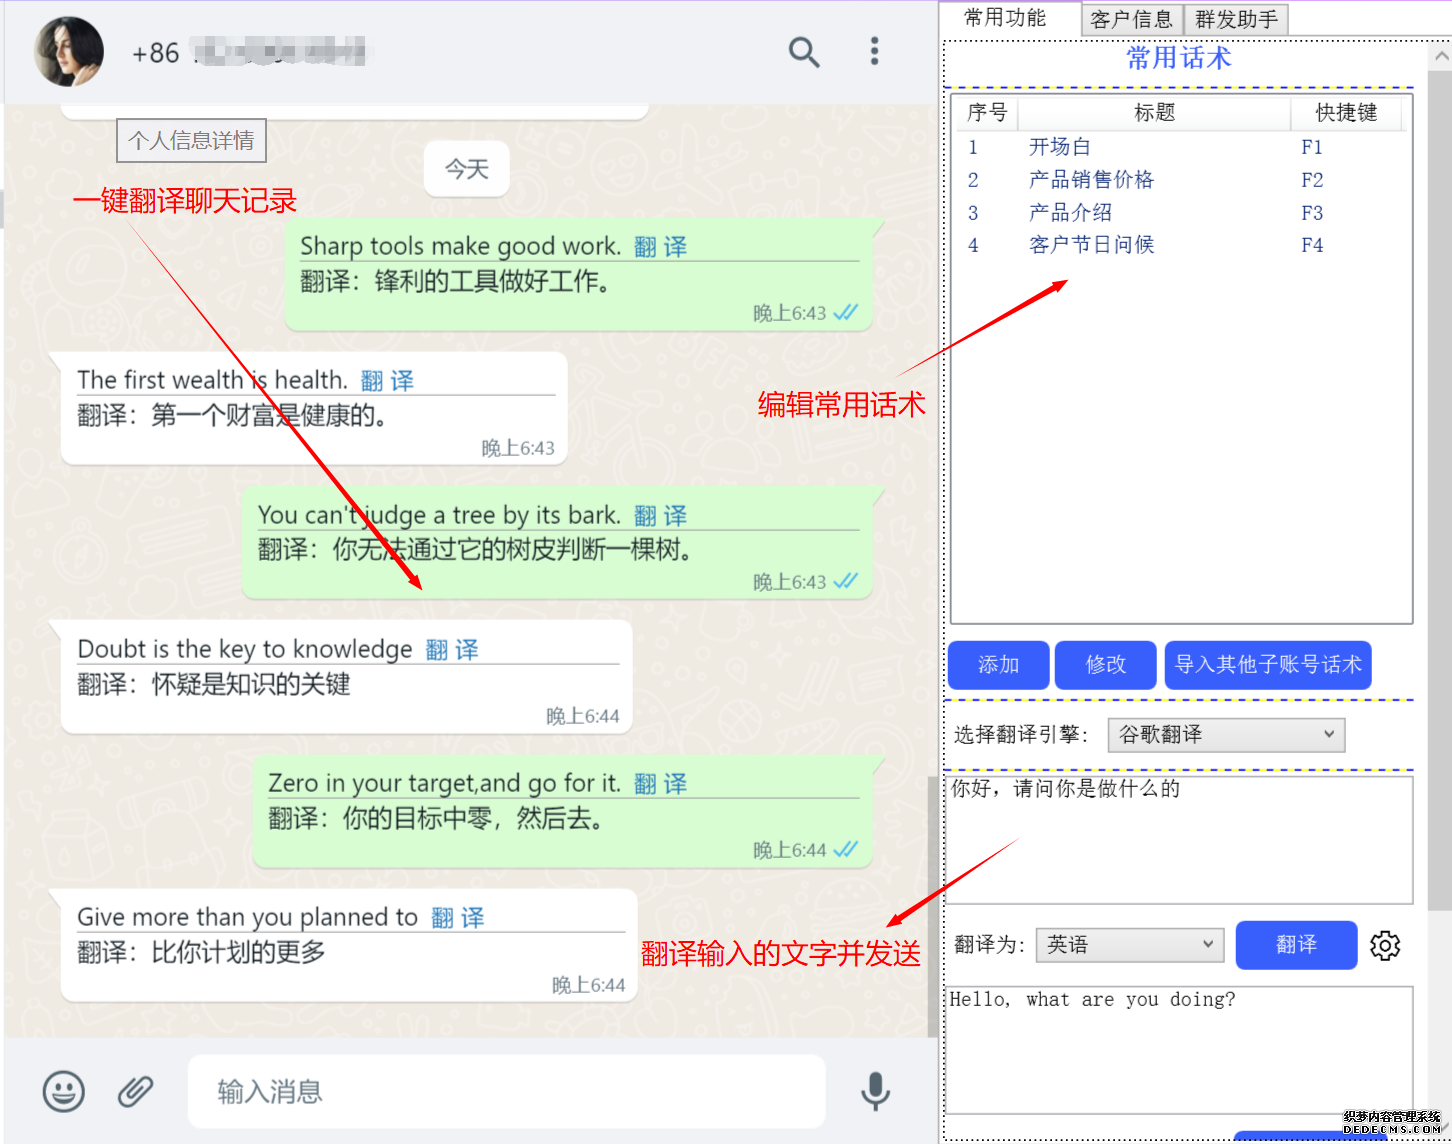 Whatsapp/Line customer service system translation software free hands, one key translation chat records!